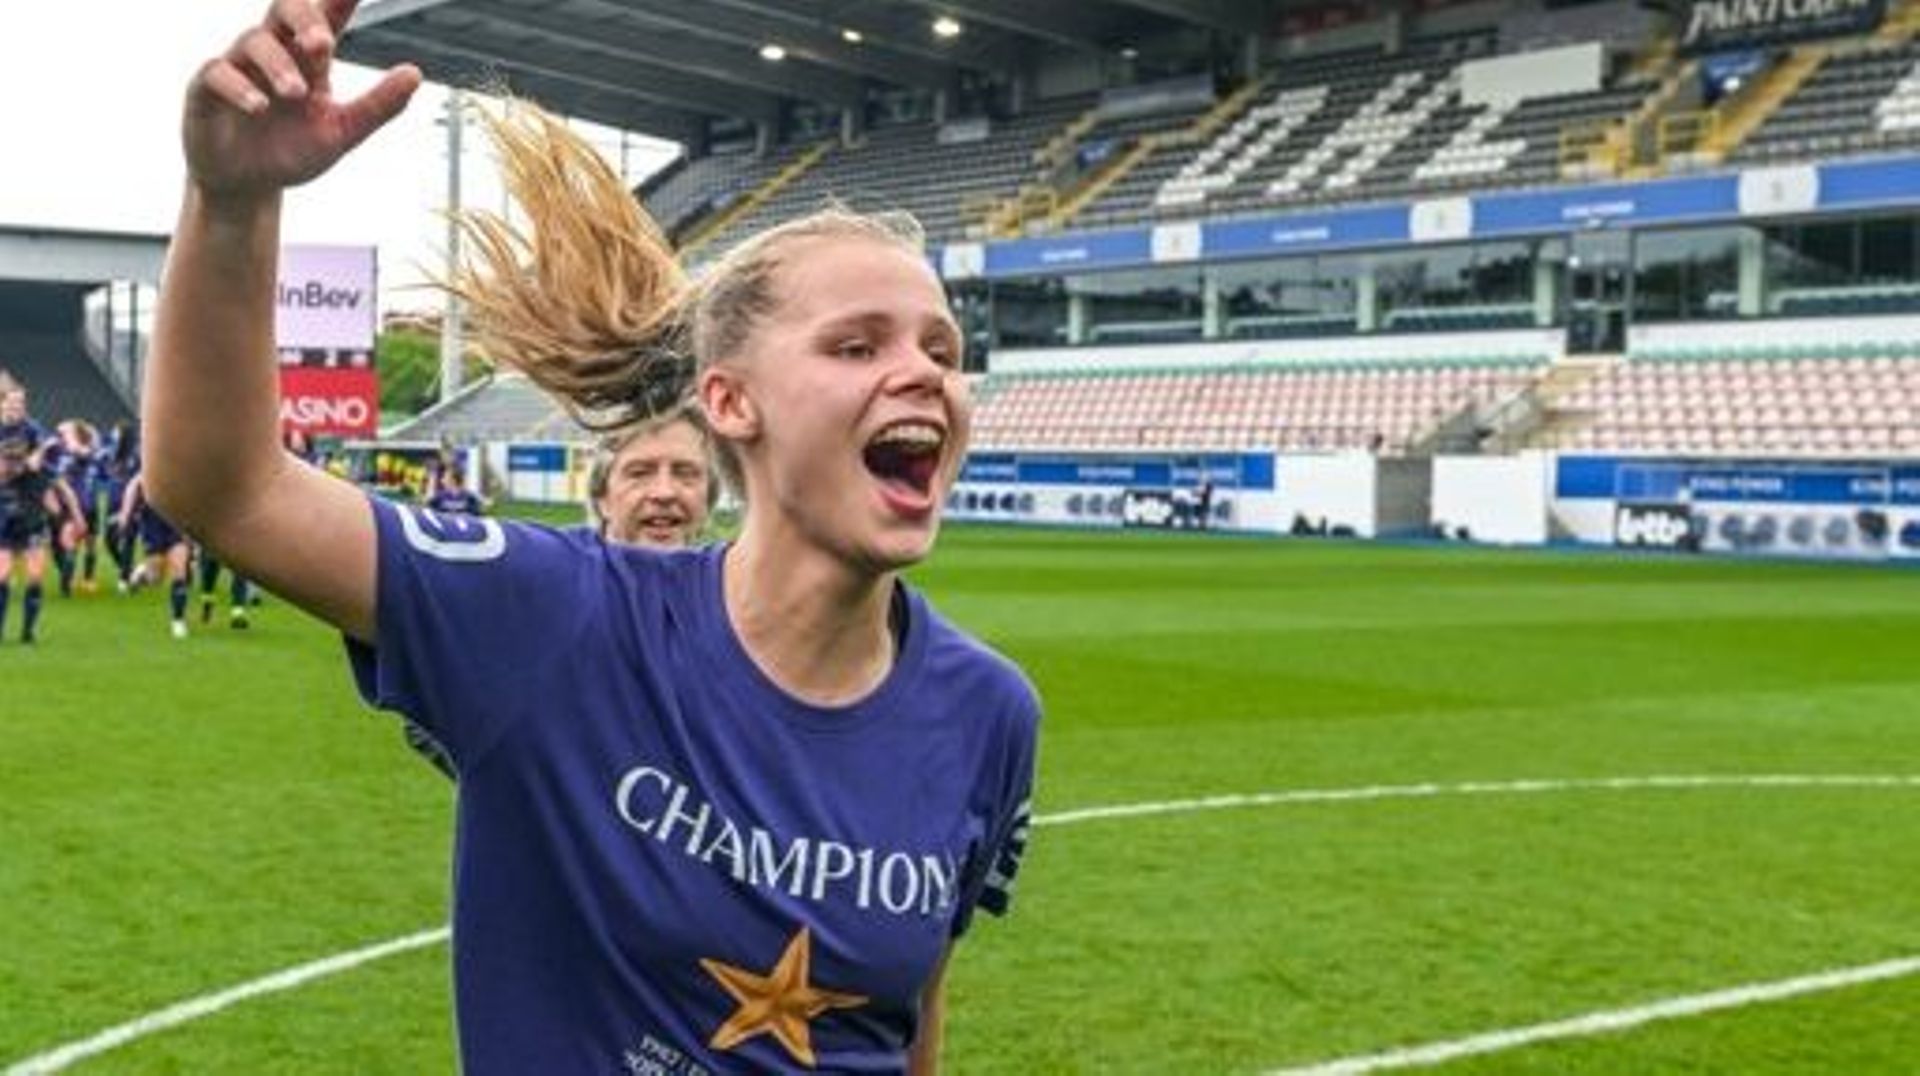 Anderlecht Women’s players with Lore Jacobs celebrating after winning the Champions title after a soccer match between OH Leuven and RSC Anderlecht, Saturday 29 April 2023 in Leuven, on day 8 in play off 1 of the 2022-2023 Belgian 'Super League' women’s f